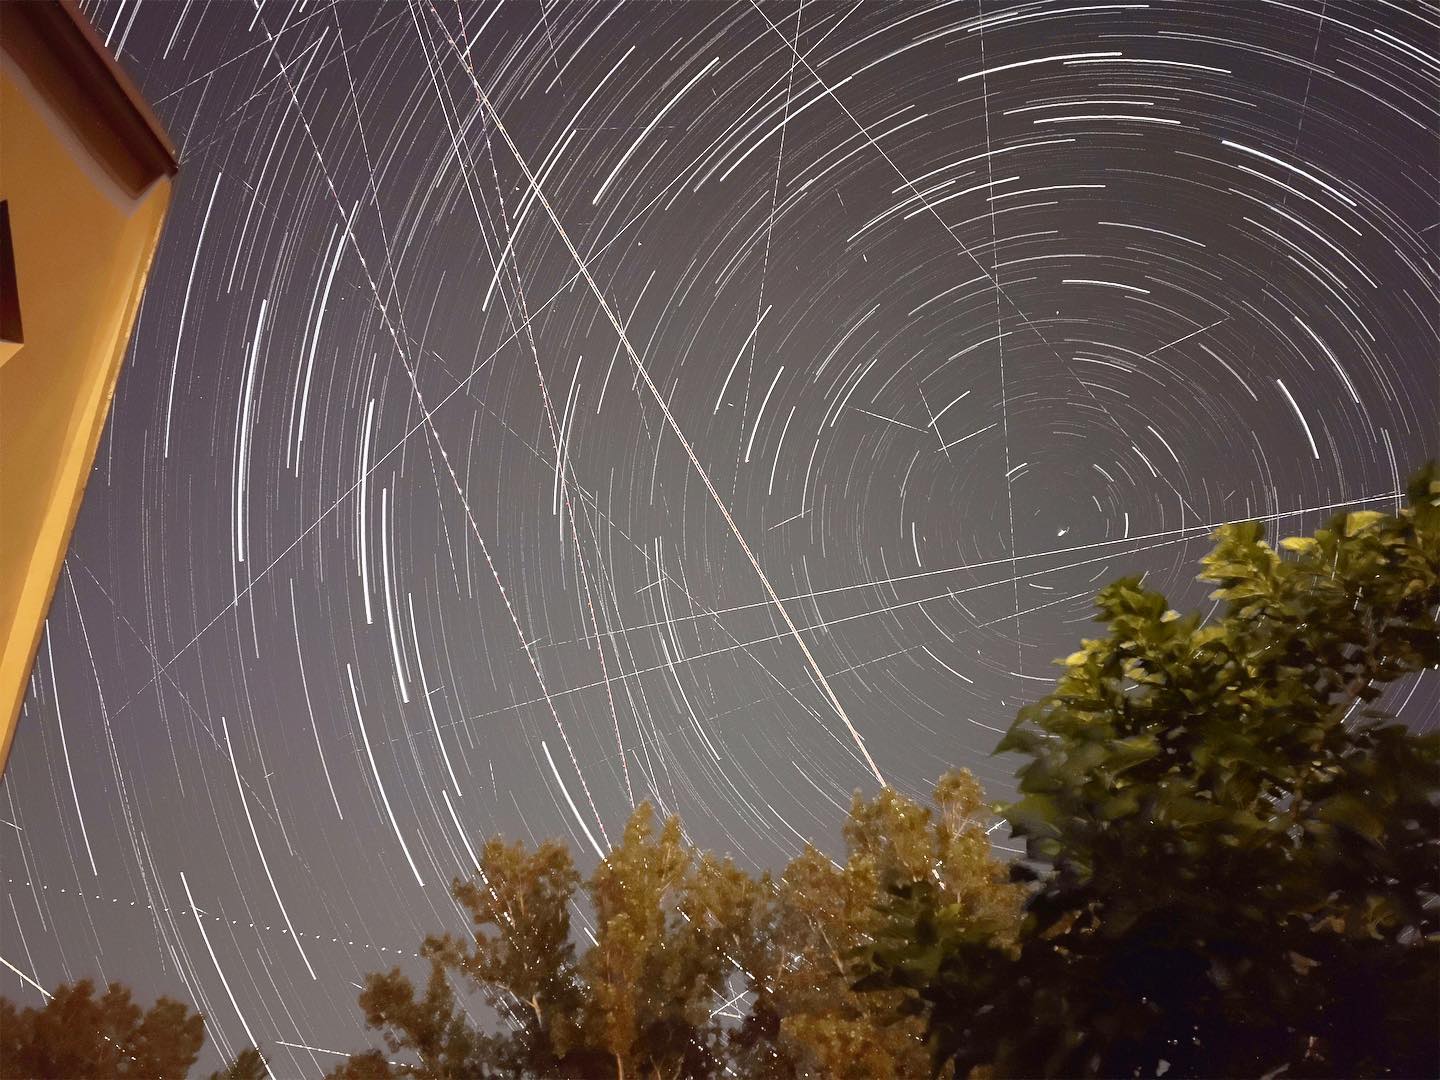 it is indeed #amazing that #iphone can handle such complex photos like this one with #startrails #iphone13pro #nightcap #camera #app #astrophotography #nightphotography #czechrepublic #moravia #stars